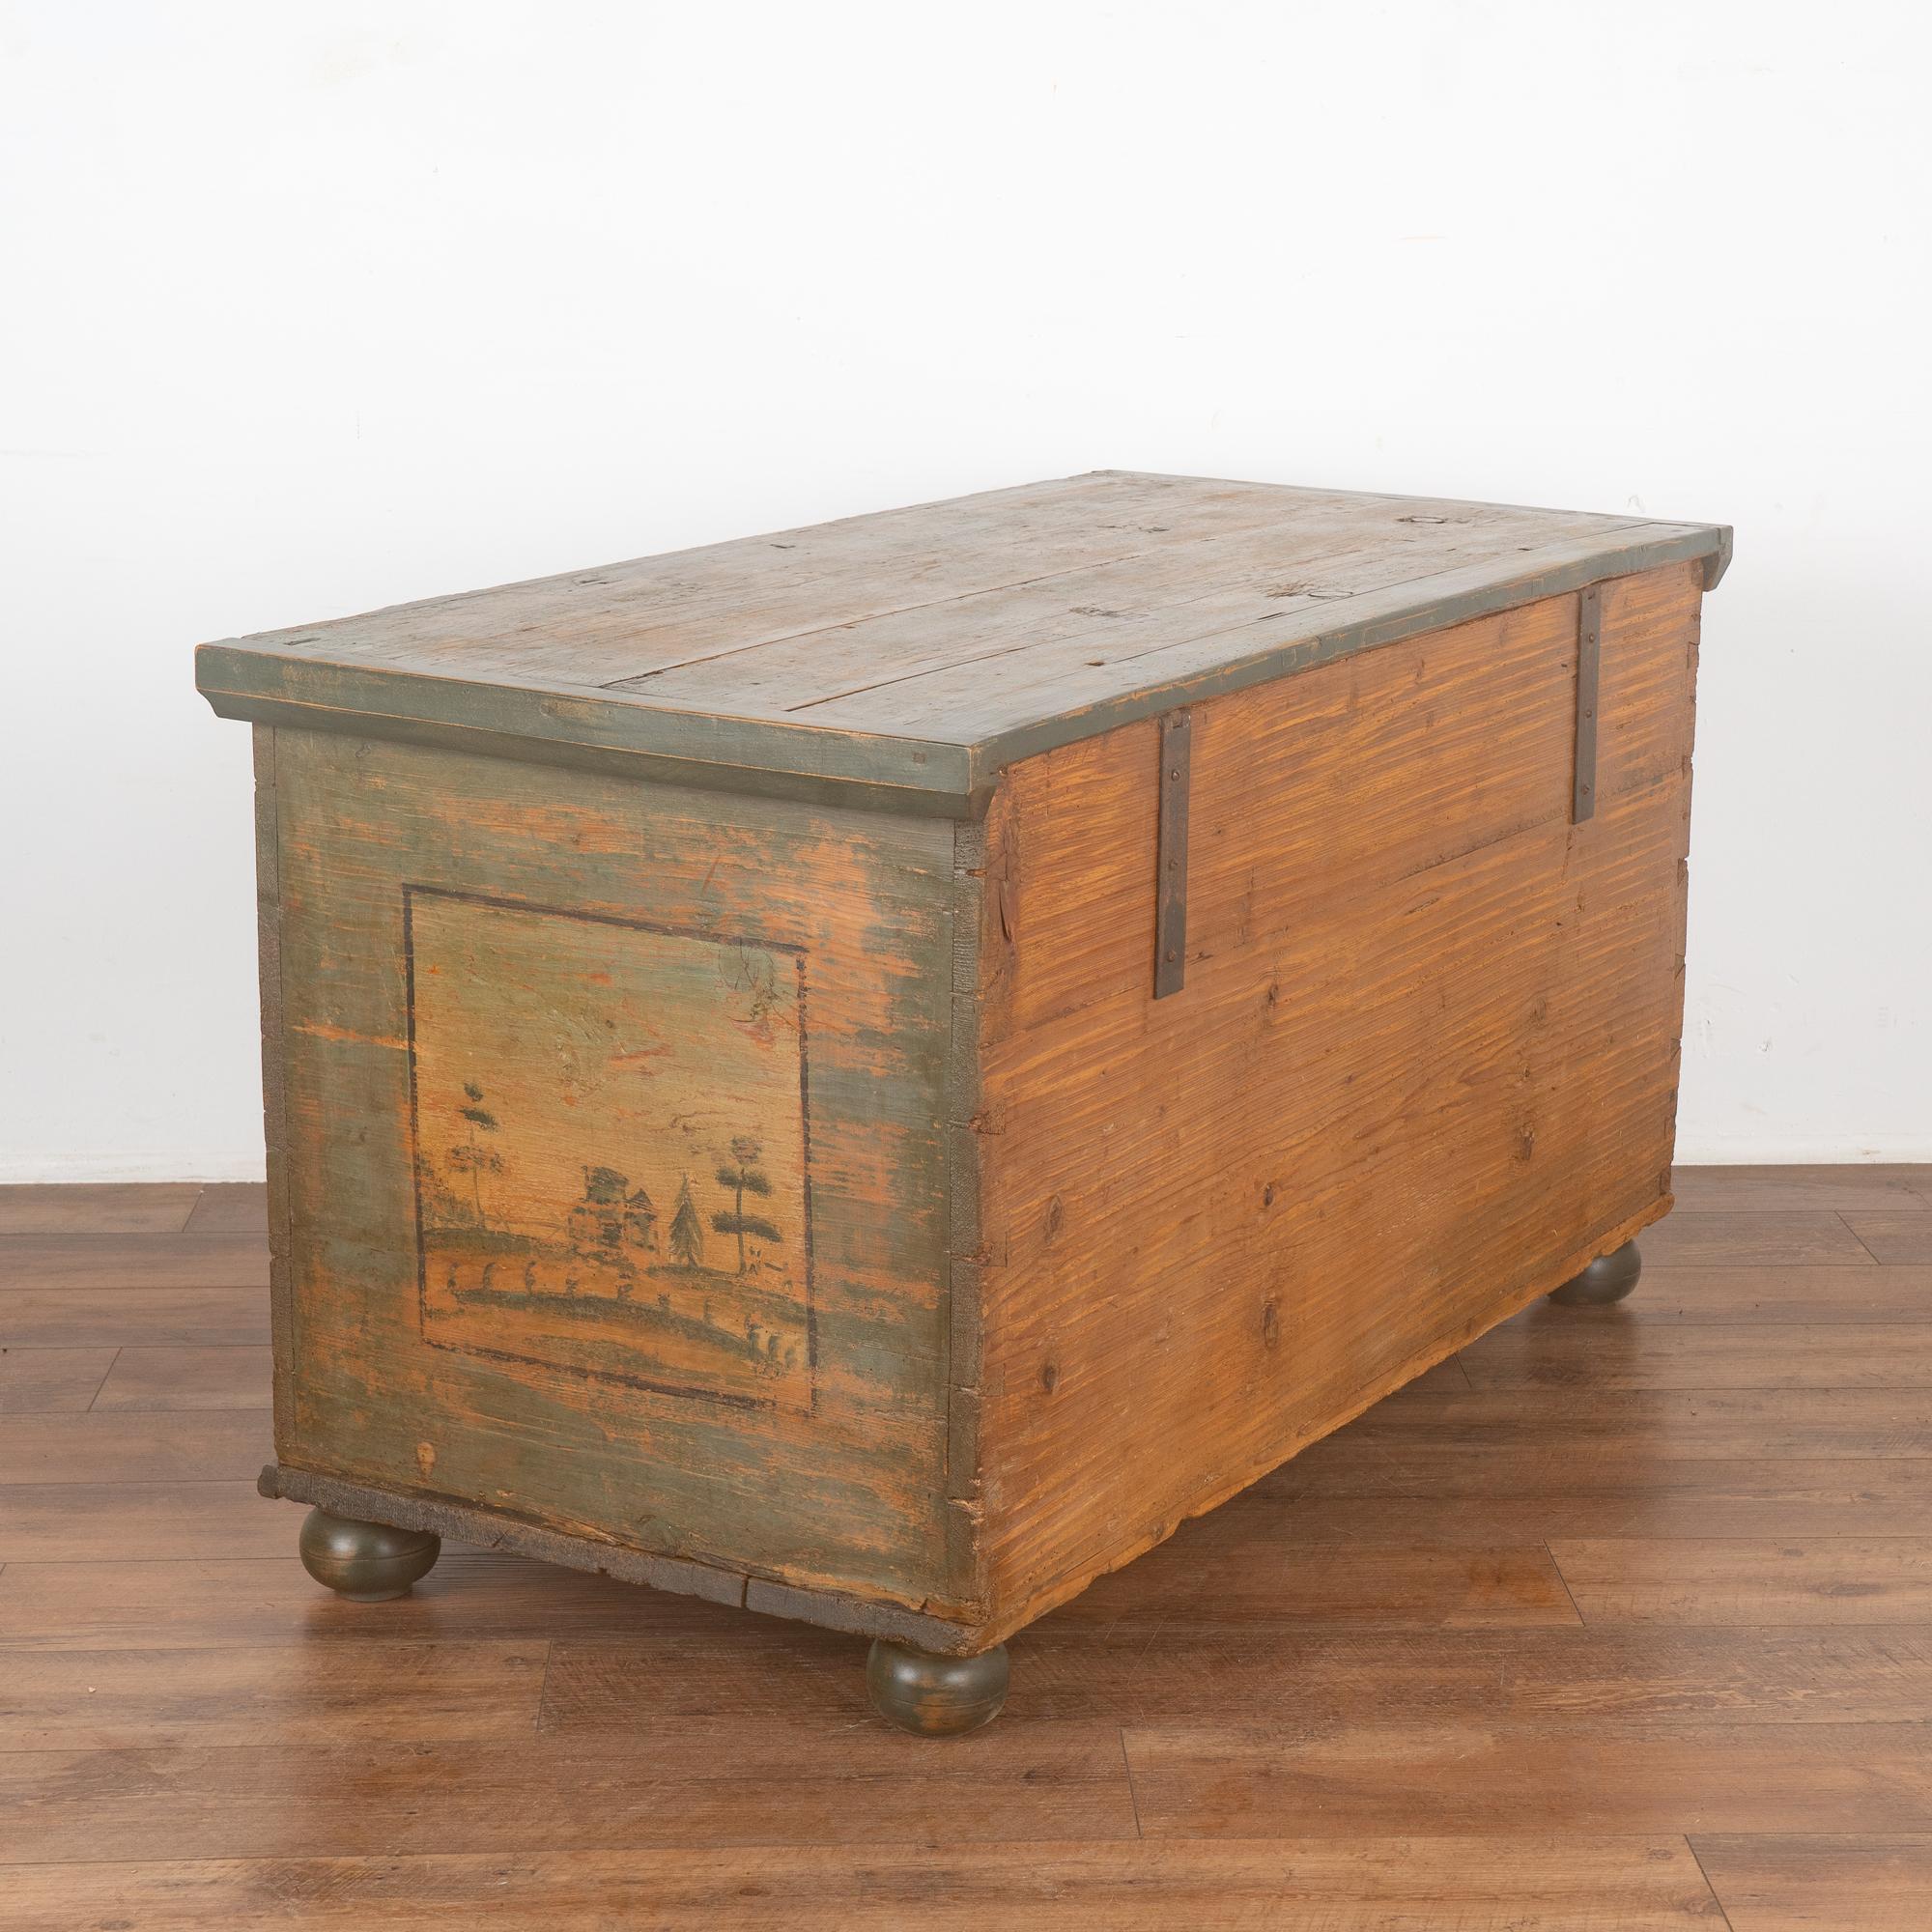 Original Green Painted Flat Top Trunk, Austria dated 1808 For Sale 6